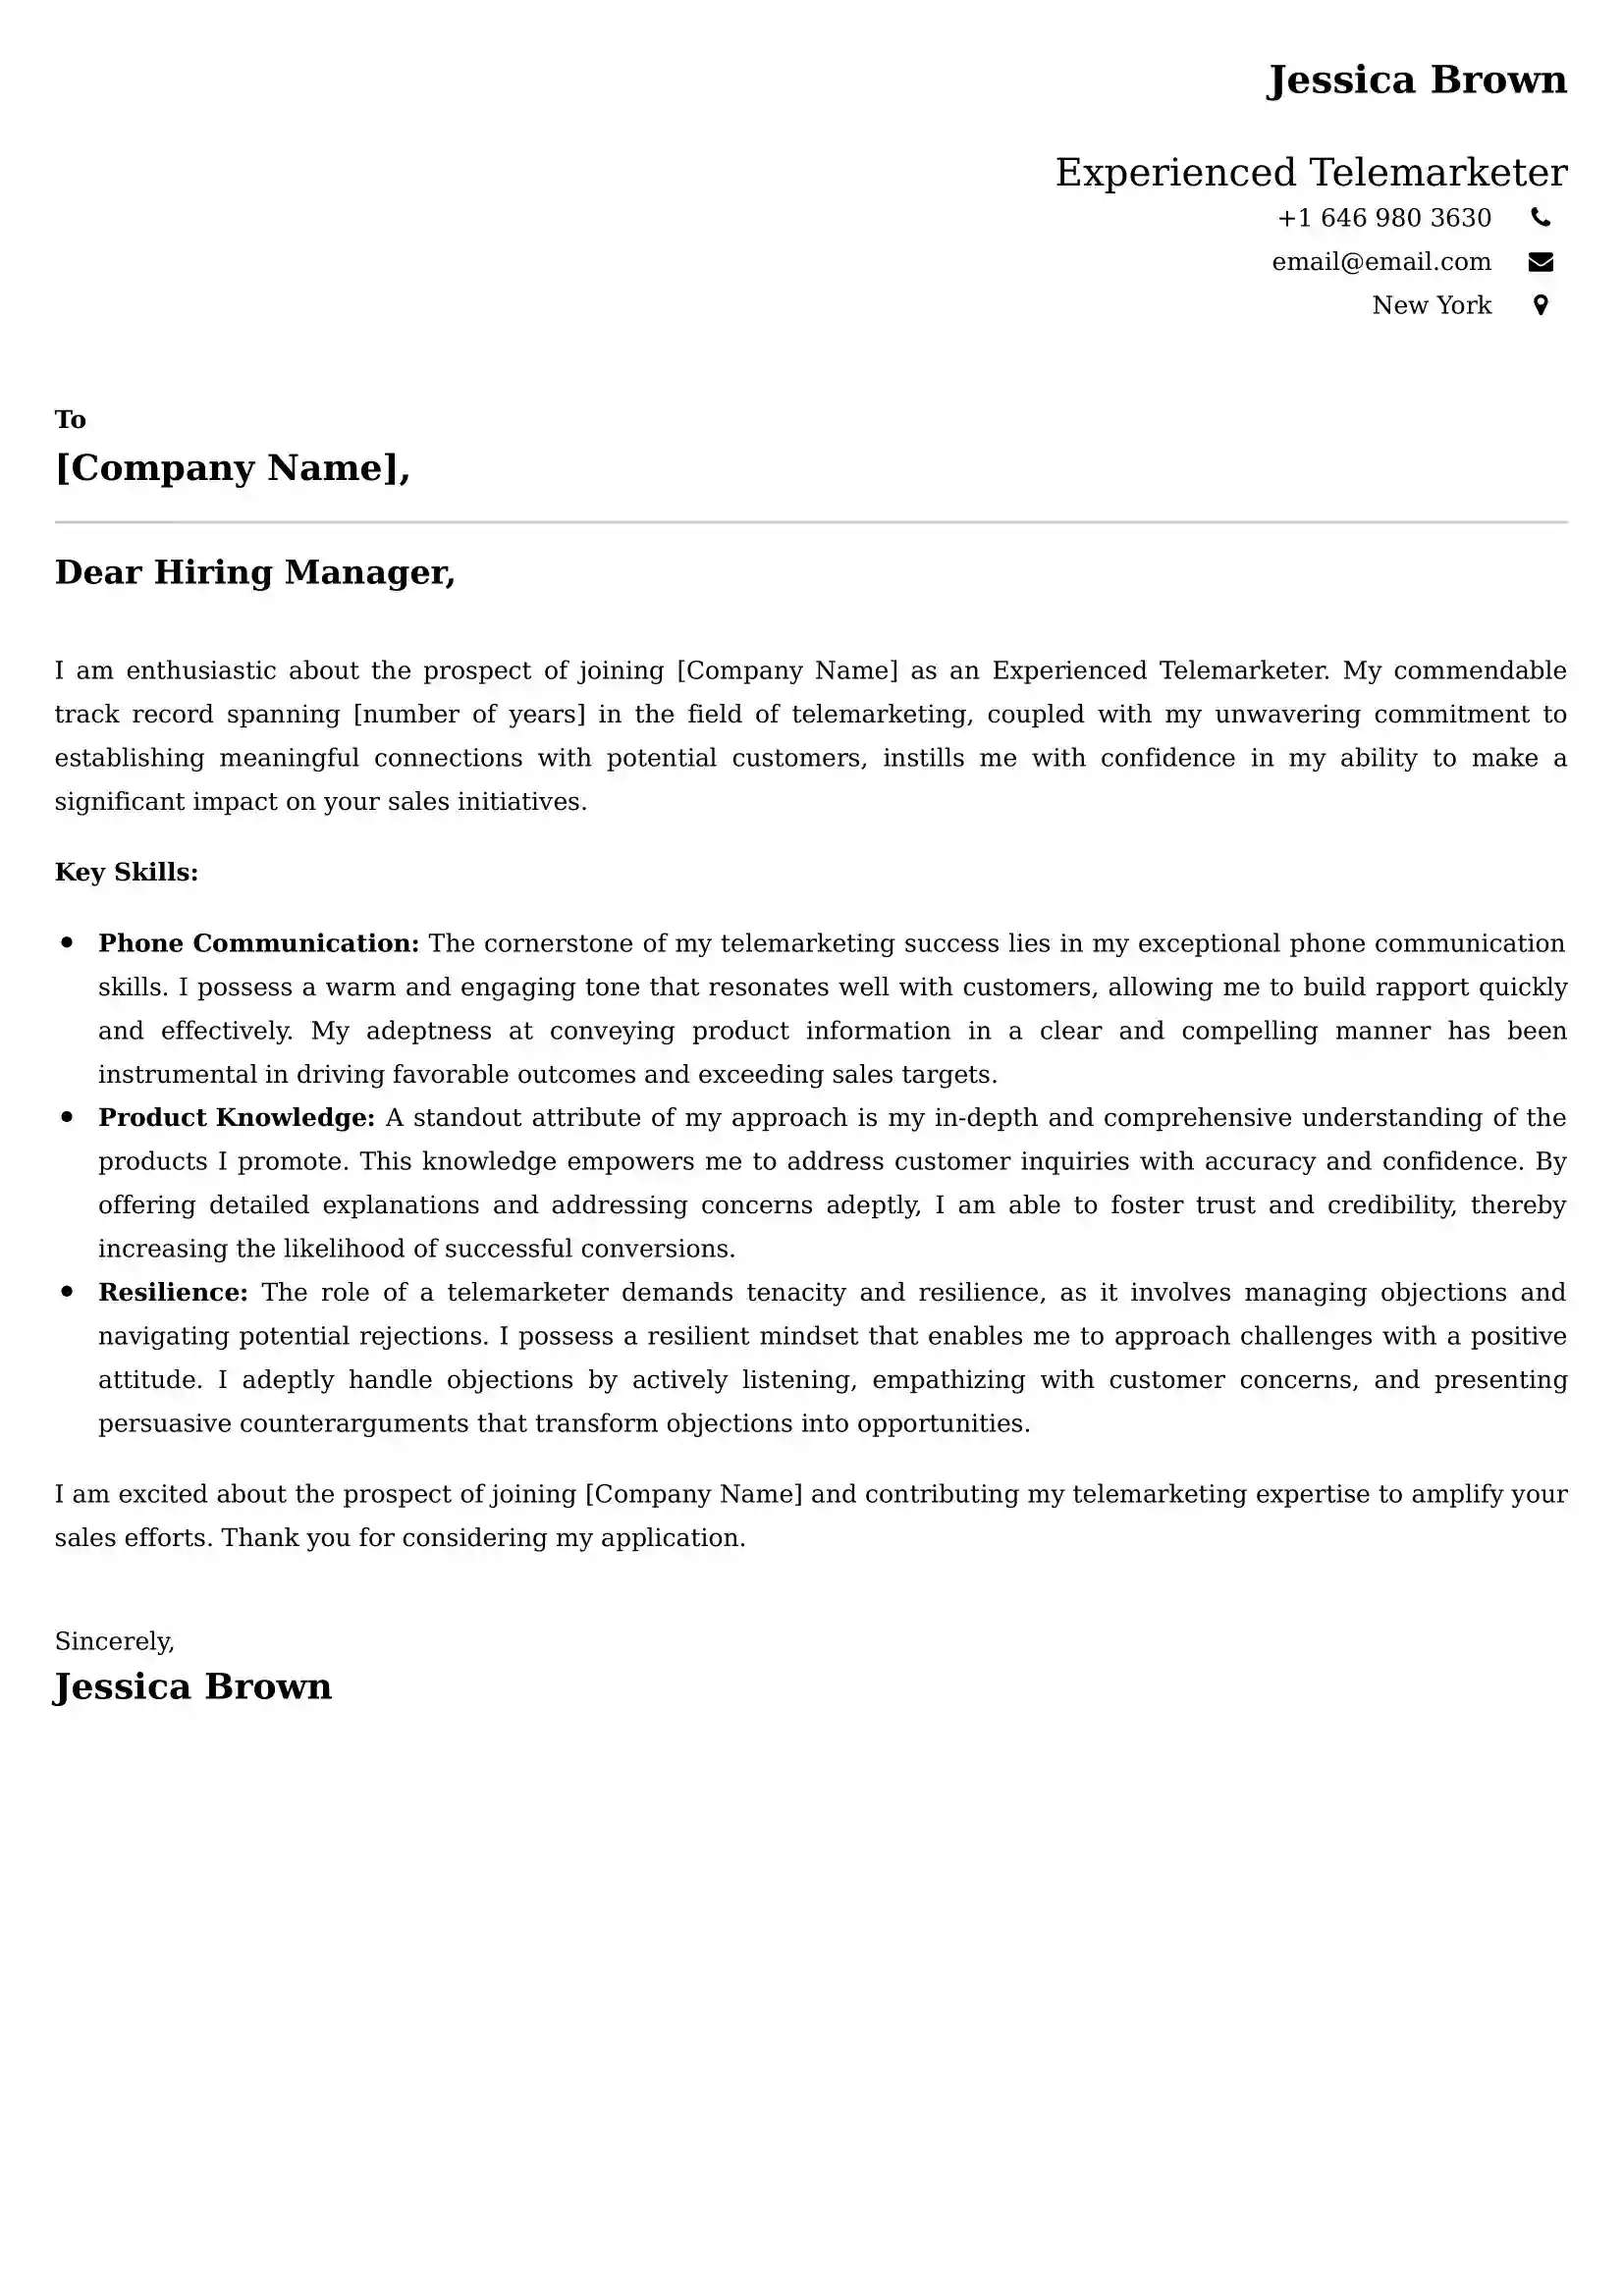 Experienced Telemarketer Cover Letter Examples -Latest Brazilian Templates